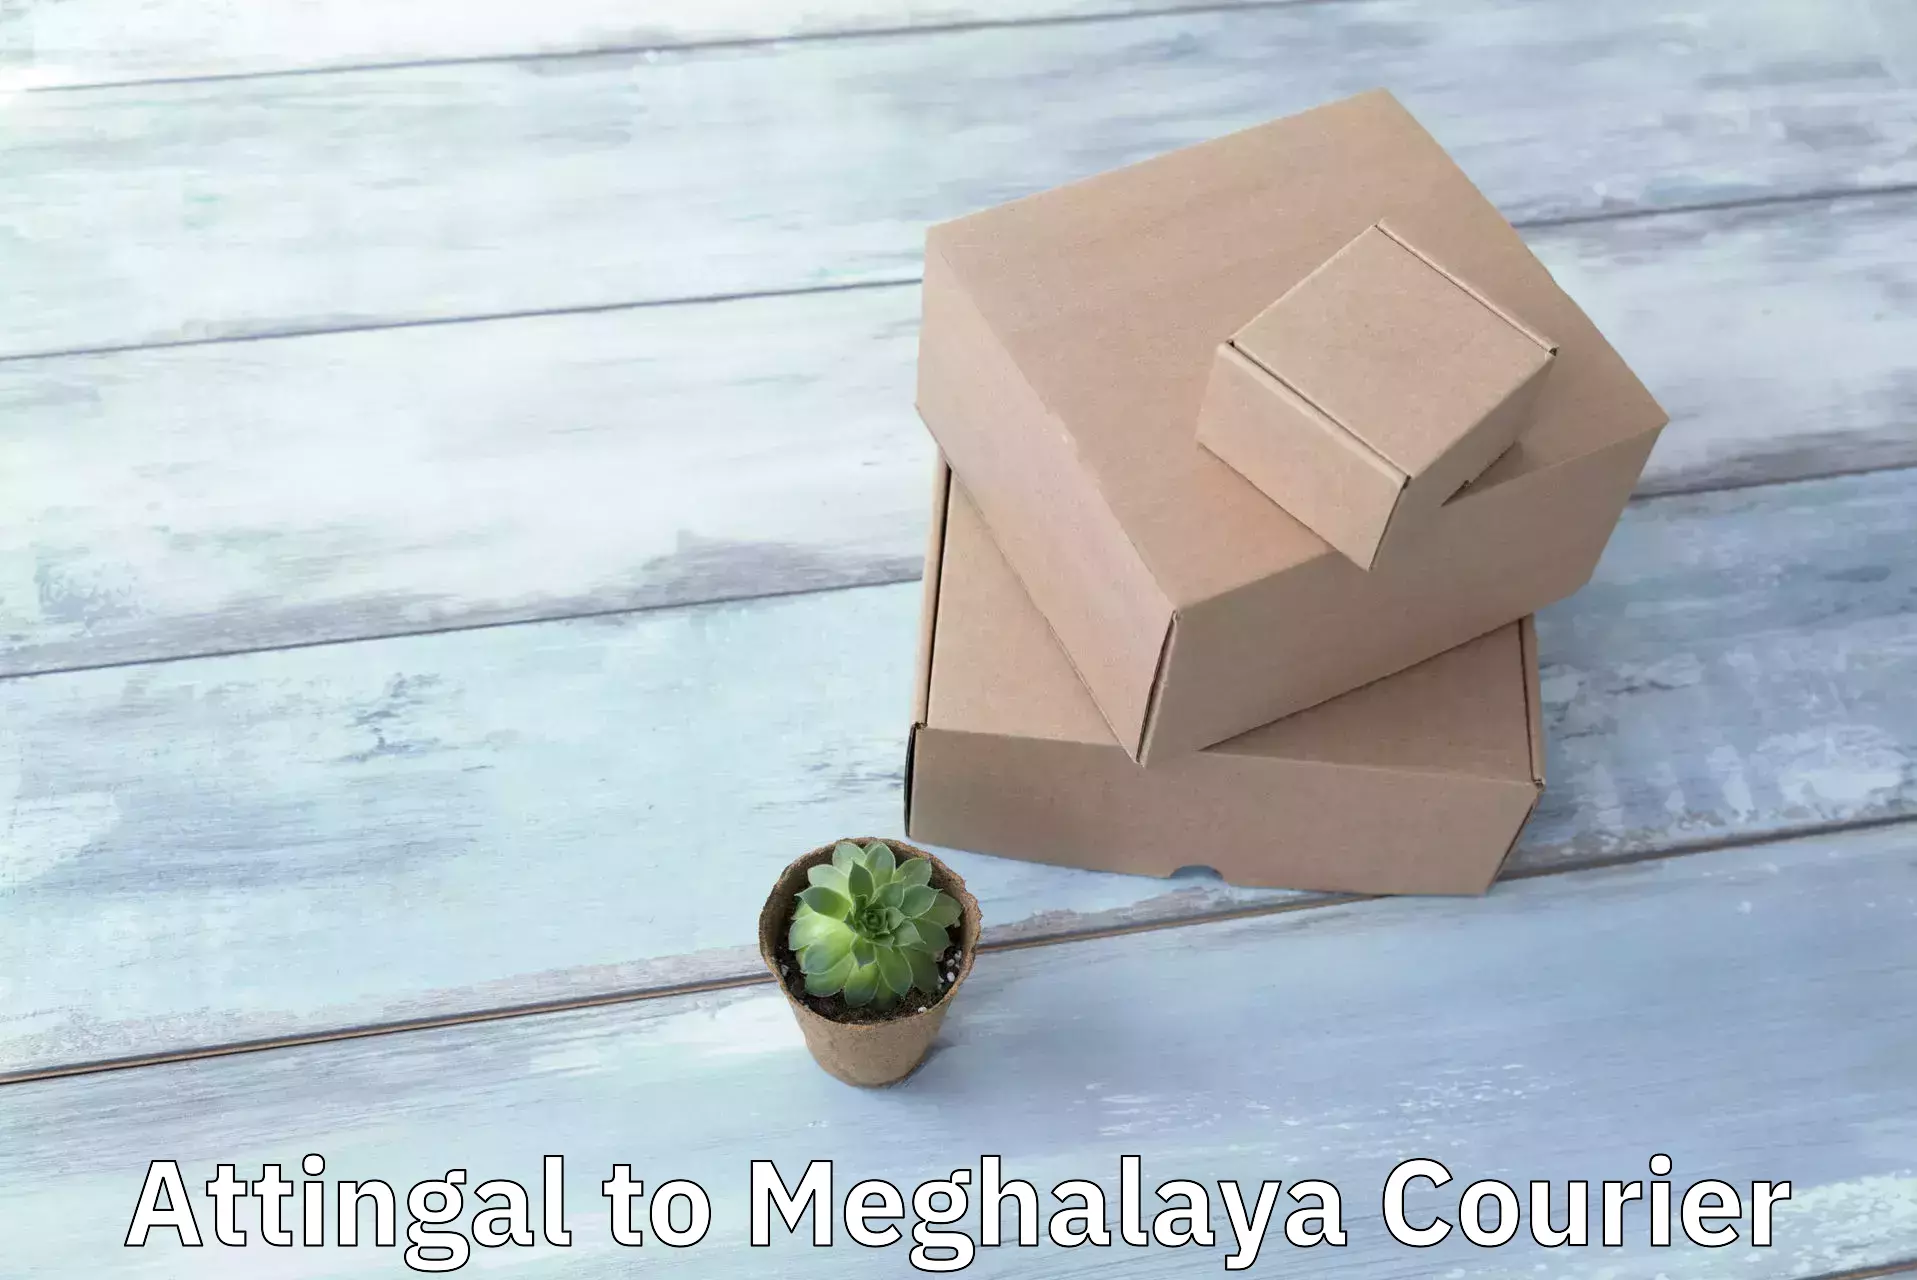 Comprehensive parcel tracking in Attingal to Meghalaya